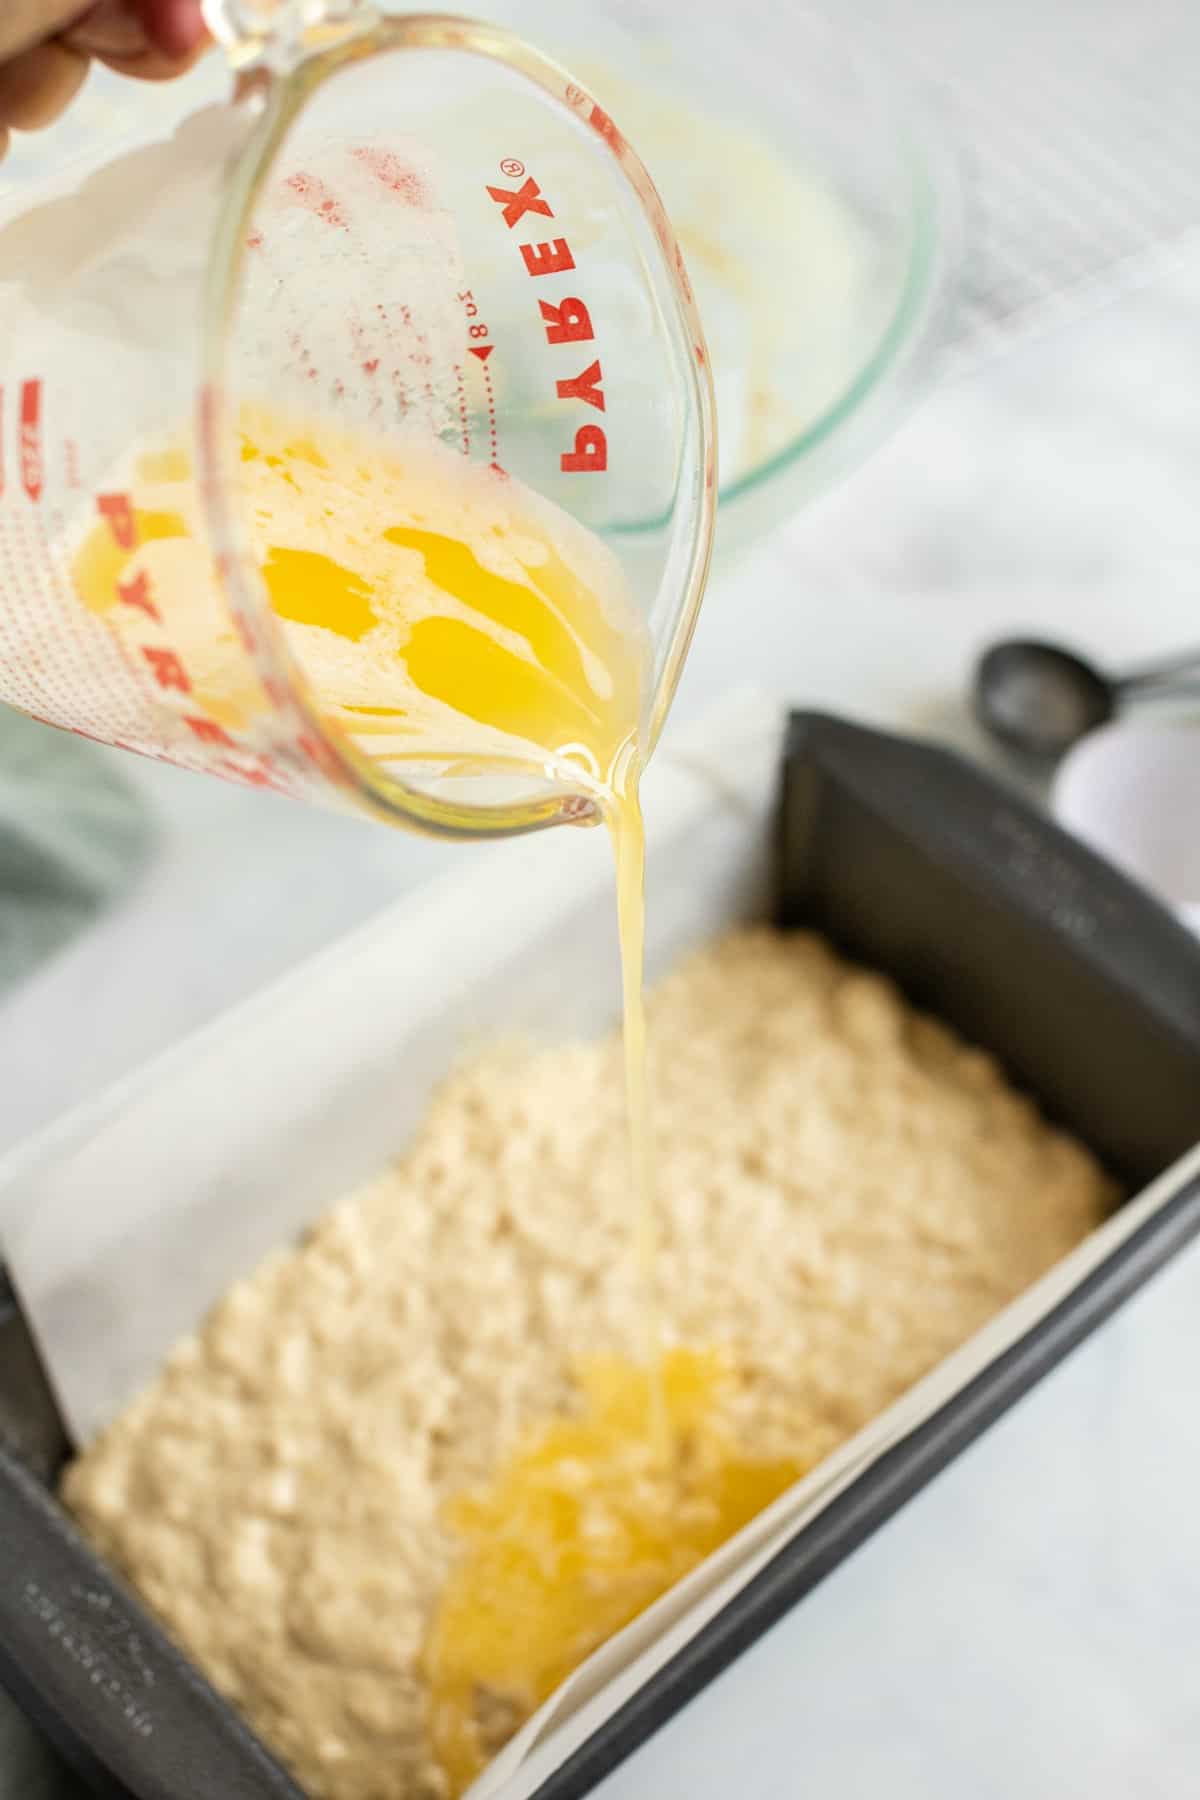 Melted butter being drizzled over uncooked beer bread batter in a loaf pan.